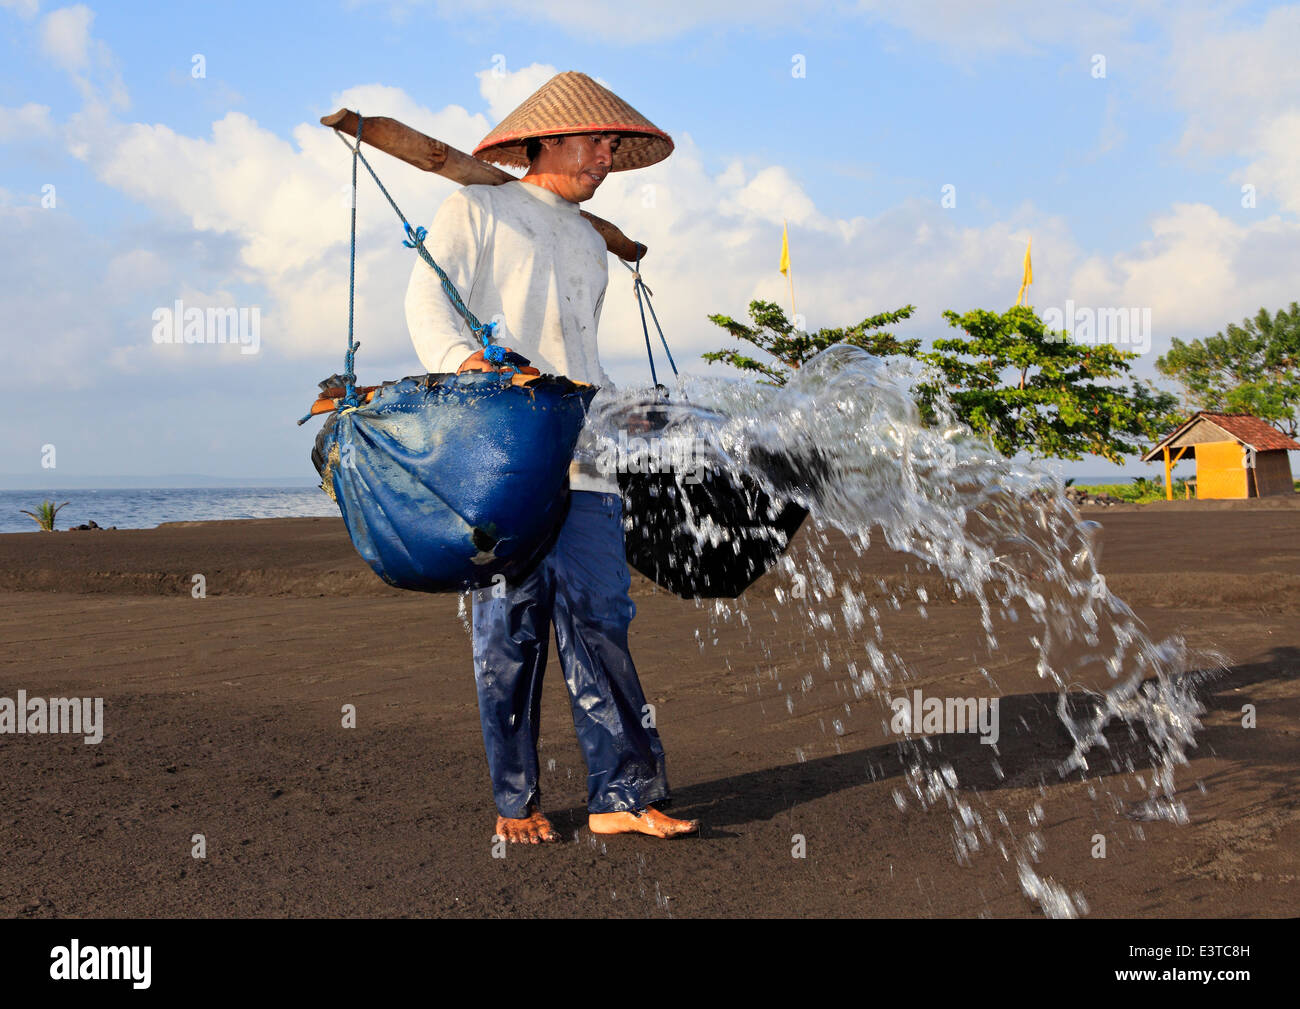 One of the few remaining traditional salt makers in Bali, at Kusamba Beach. Bali, Indonesia. Stock Photo